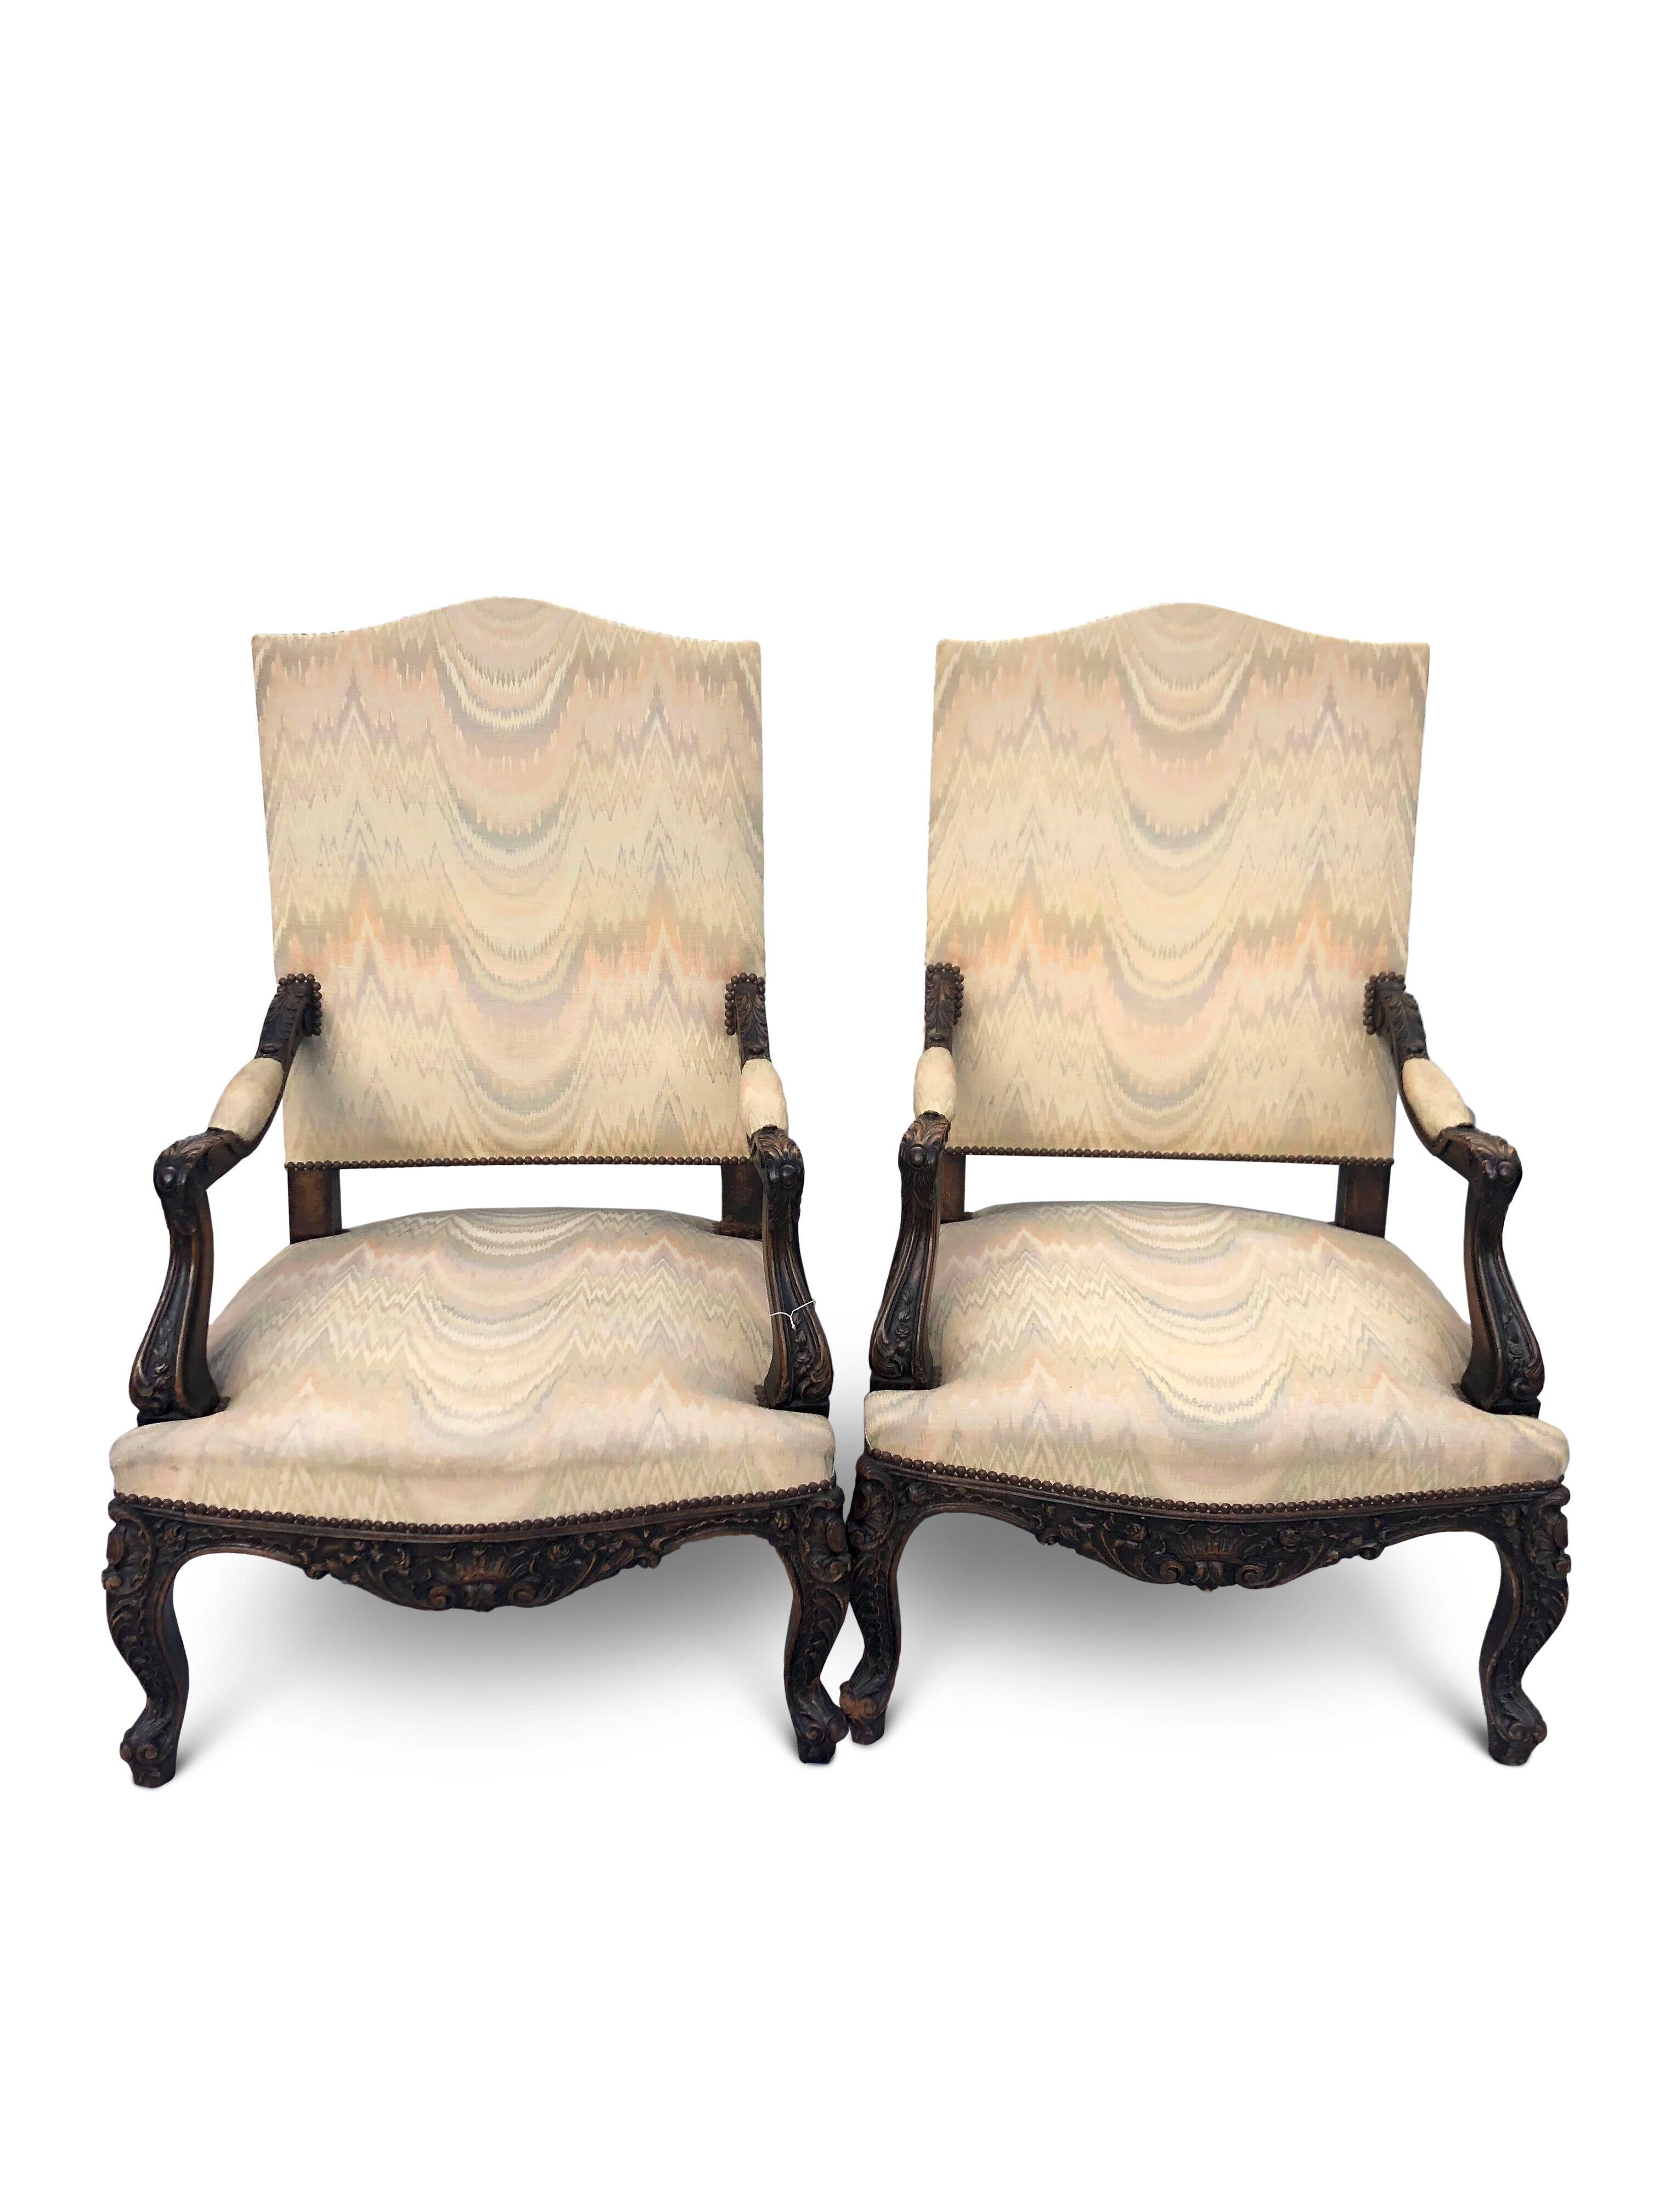 French Gainsborough Armchairs, Walnut Upholstered  circa 1920 (Pair) For Sale